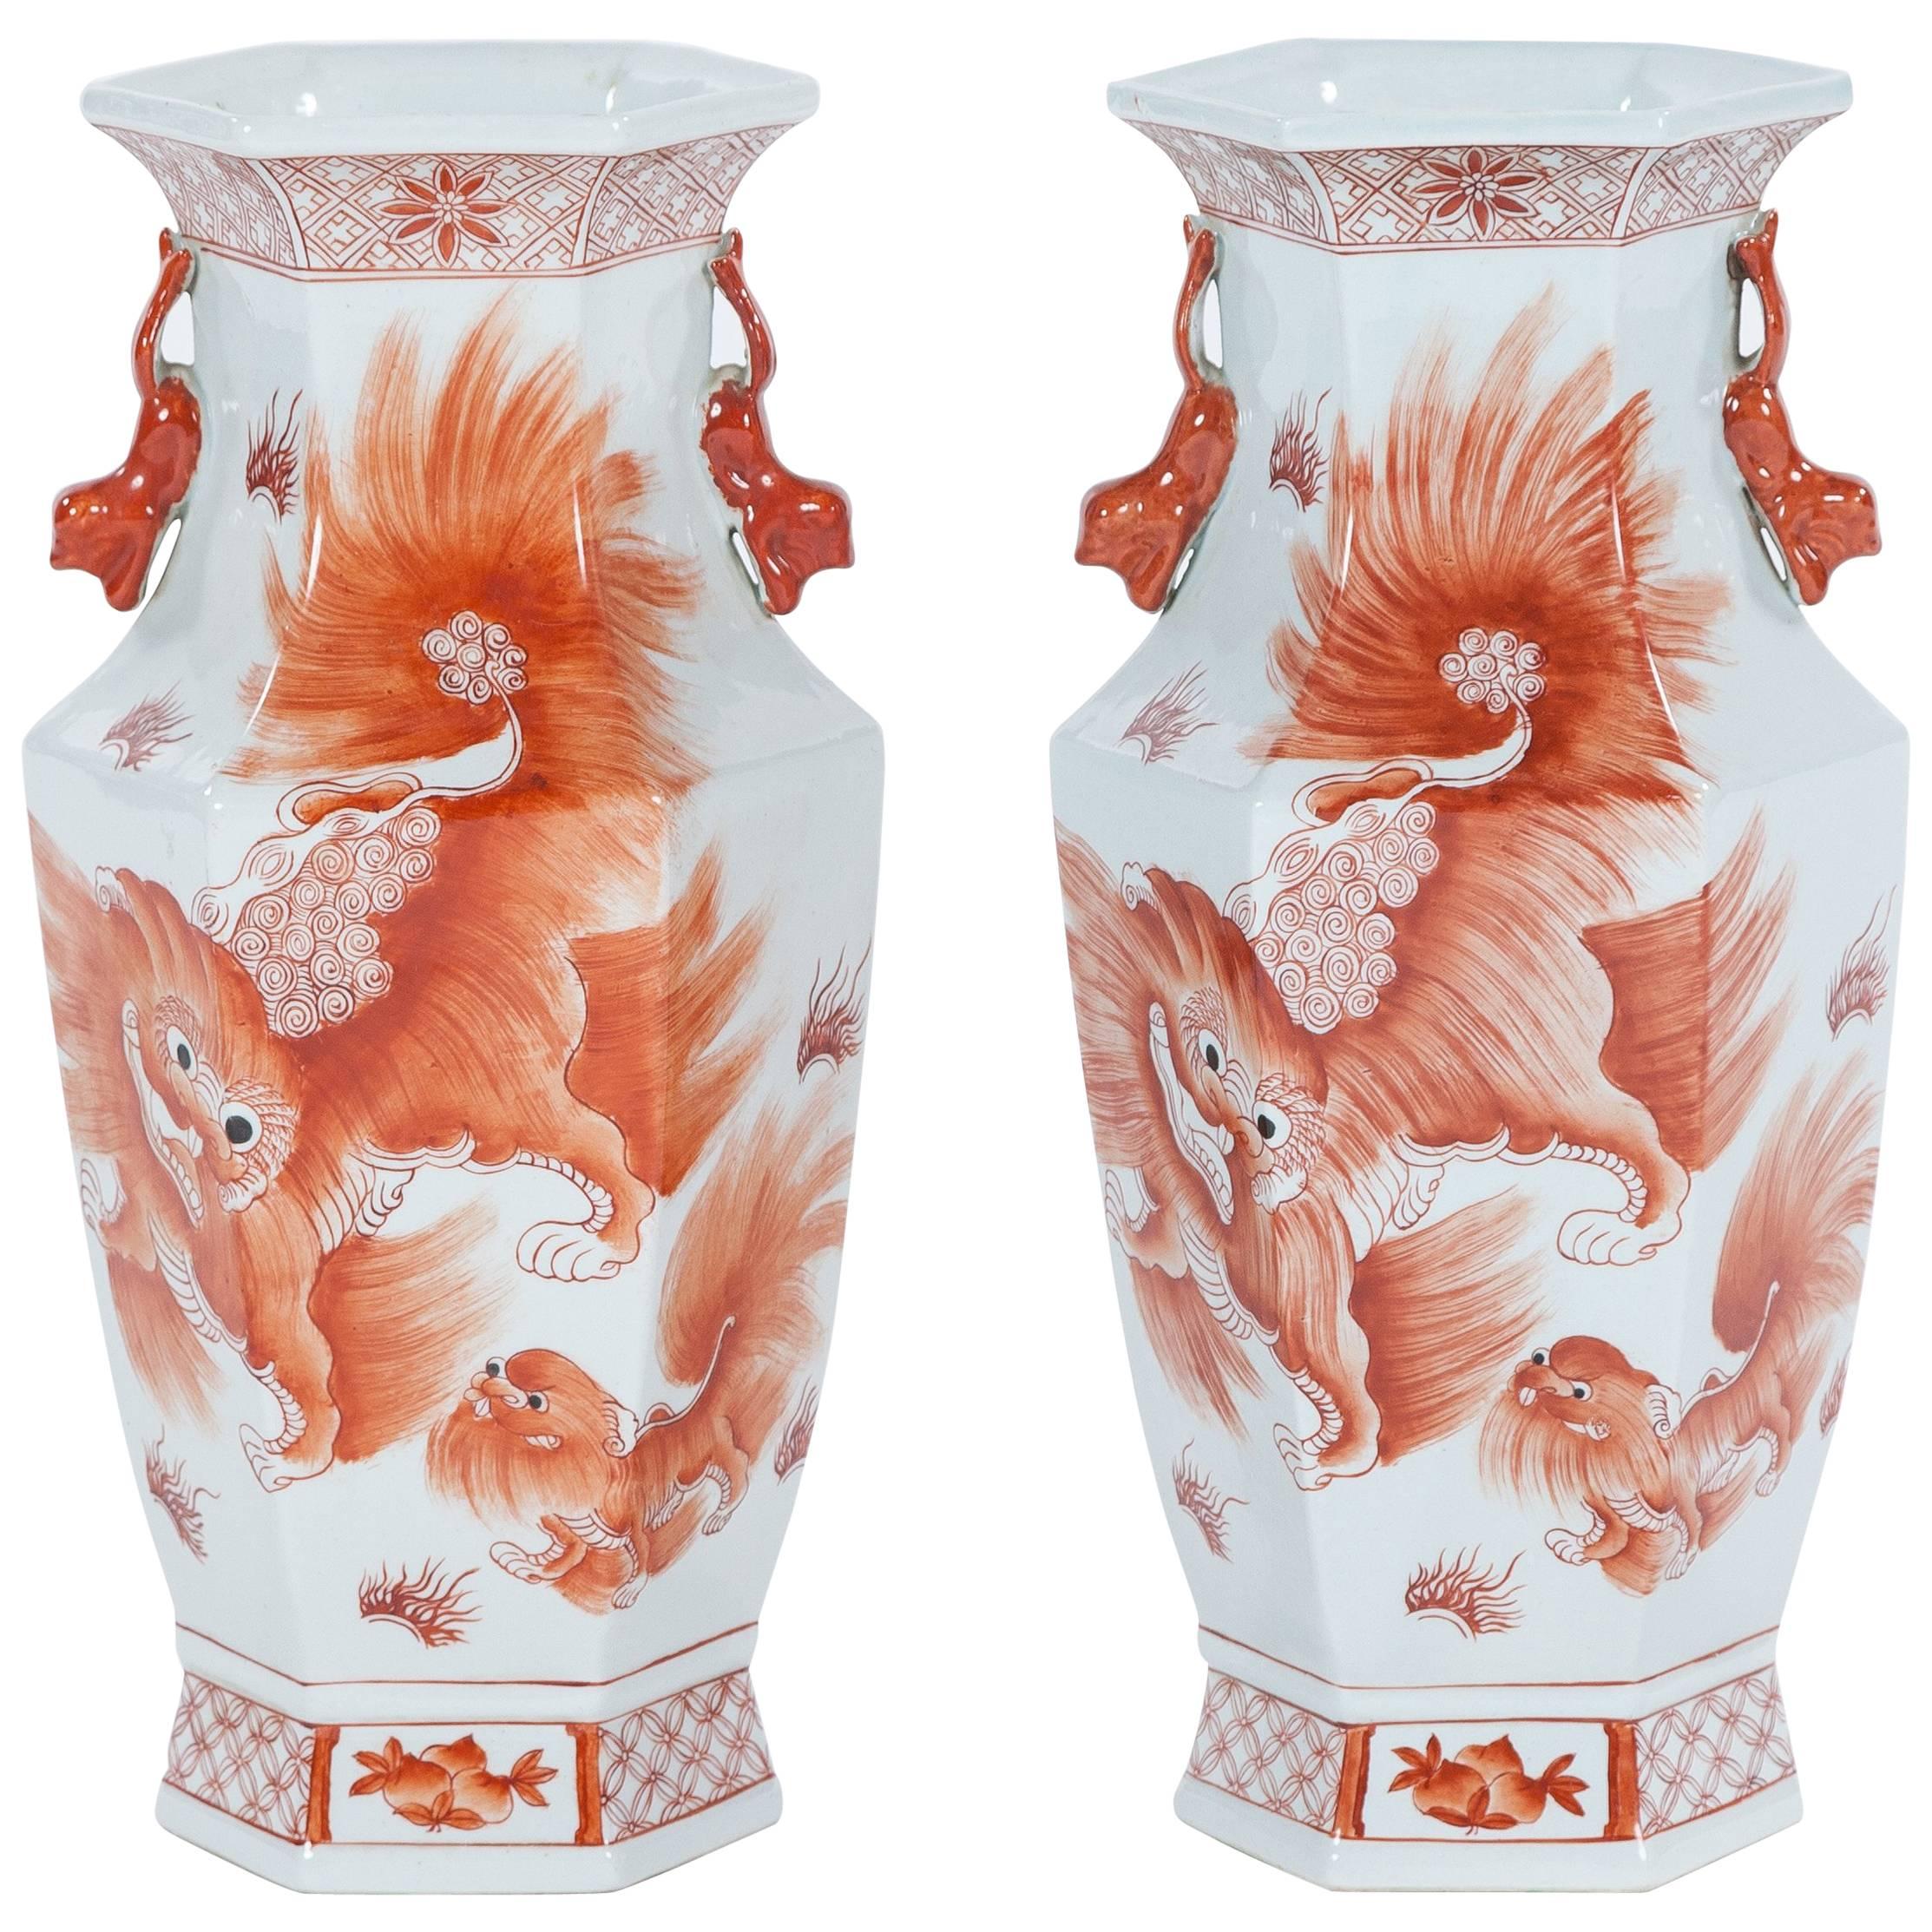 Pair of Vintage Orange and White Chinese Porcelain Vases, Early 20th Century For Sale